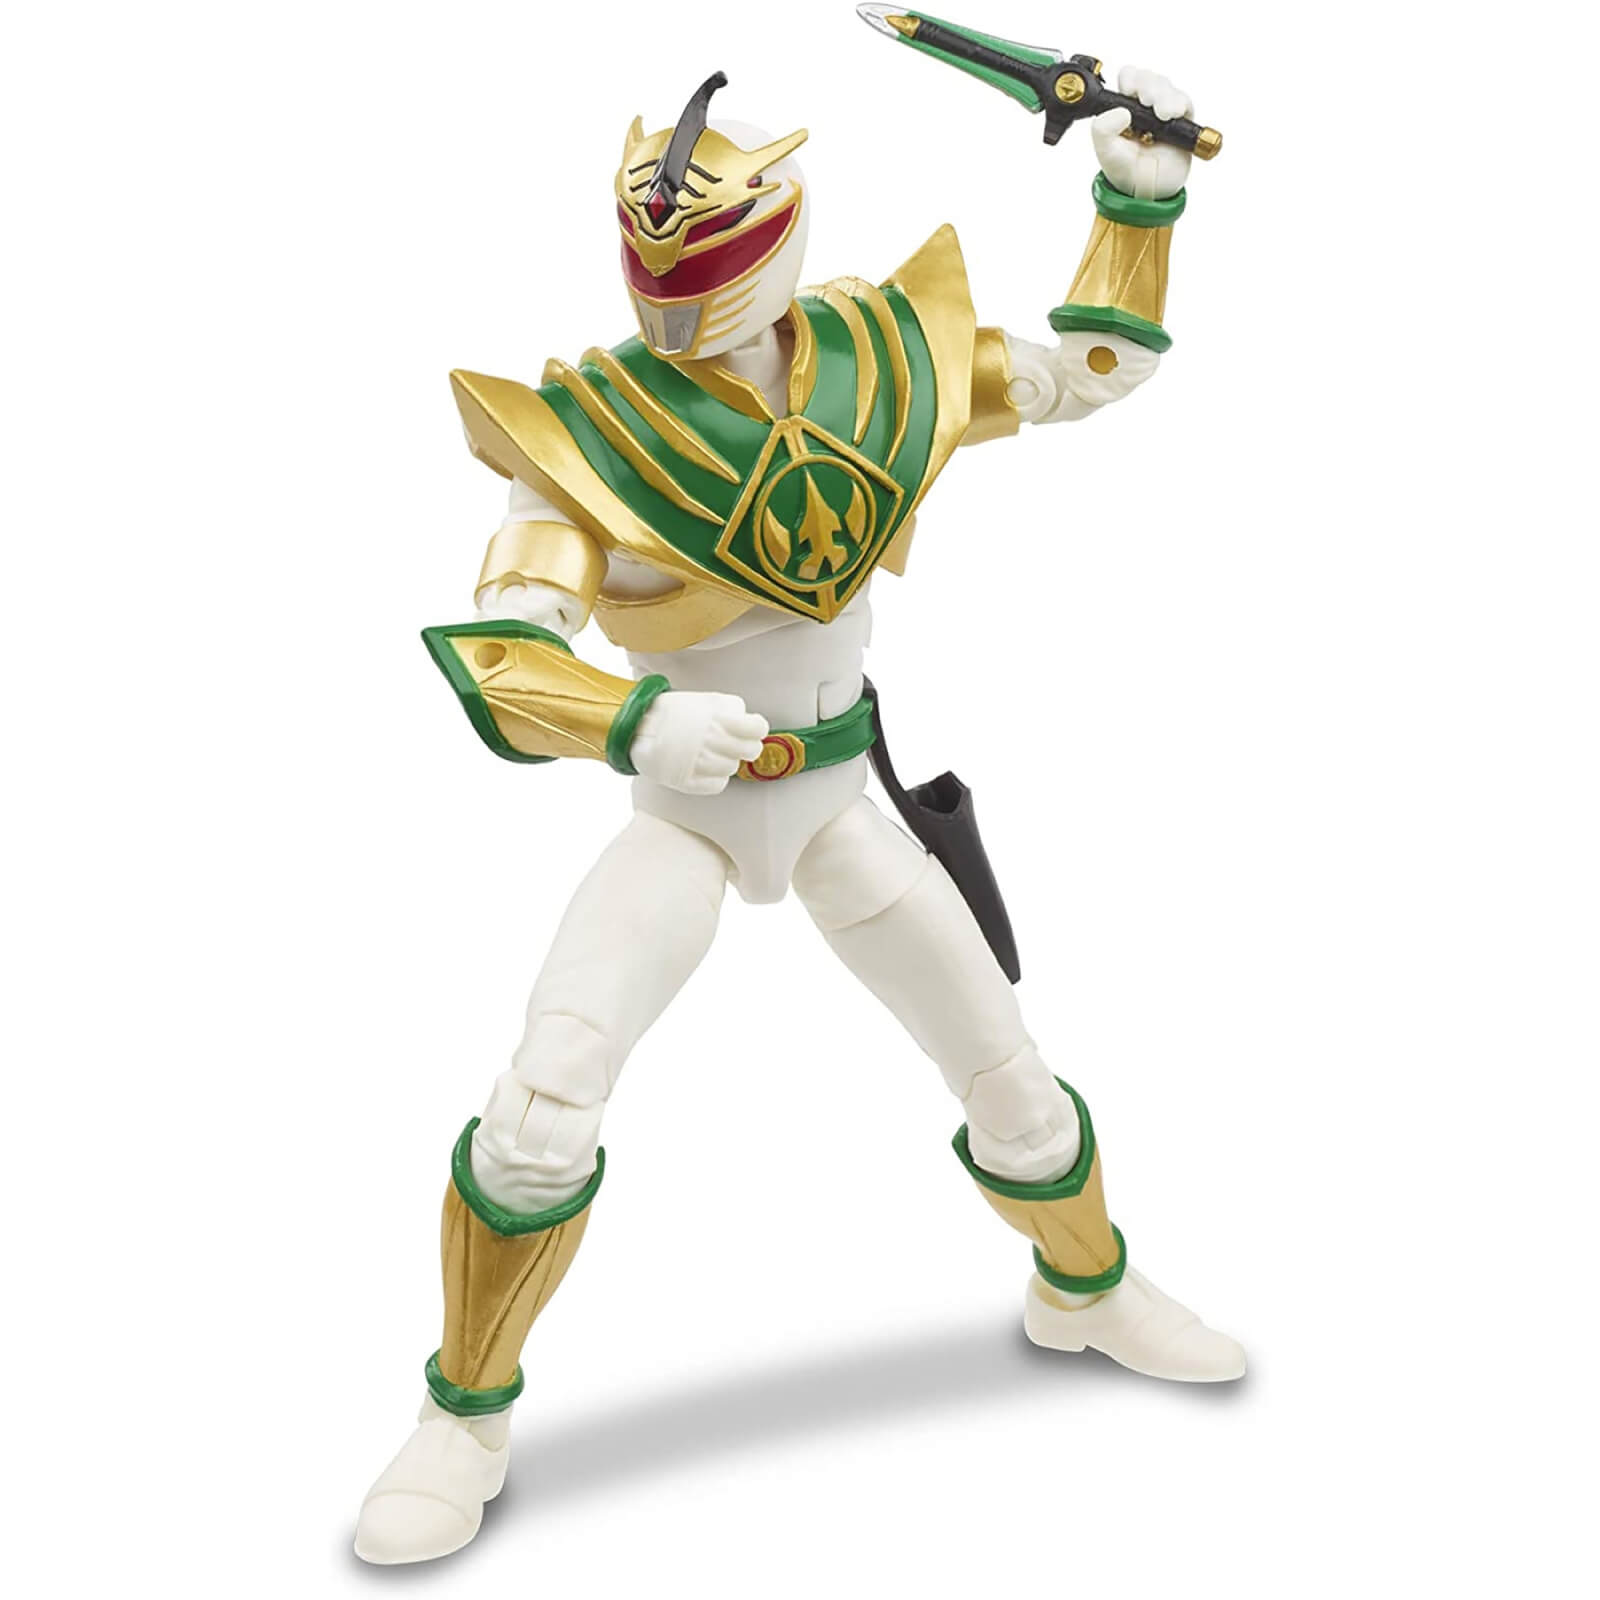 Image of Power Rangers Lightning Collection Mighty Morphin Power Rangers Lord Drakkon 6-Inch Action Figure